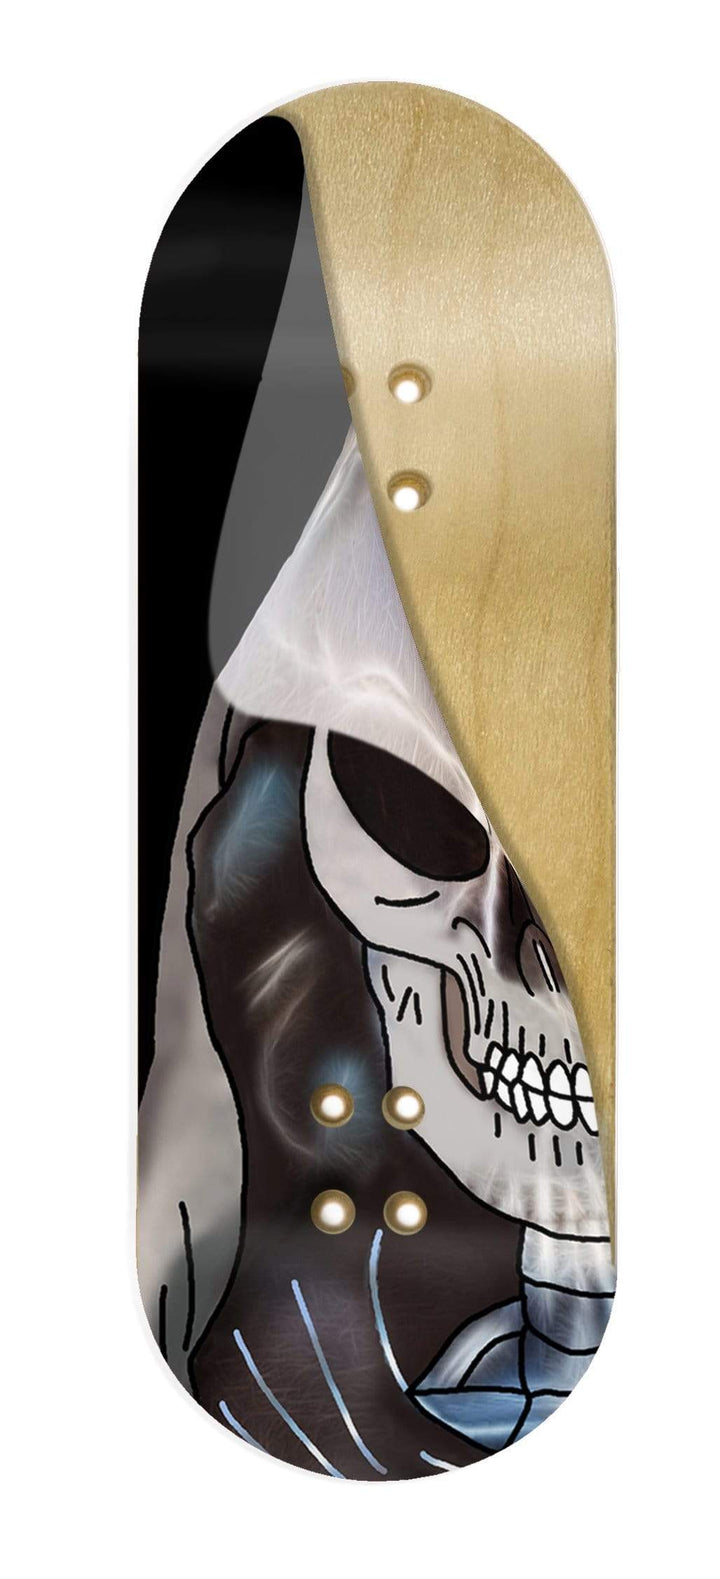 Teak Tuning "Skelly" WellVentions Collaboration Deck Graphic Wrap - Designed by Kuji (age 15) - 35mm x 110mm